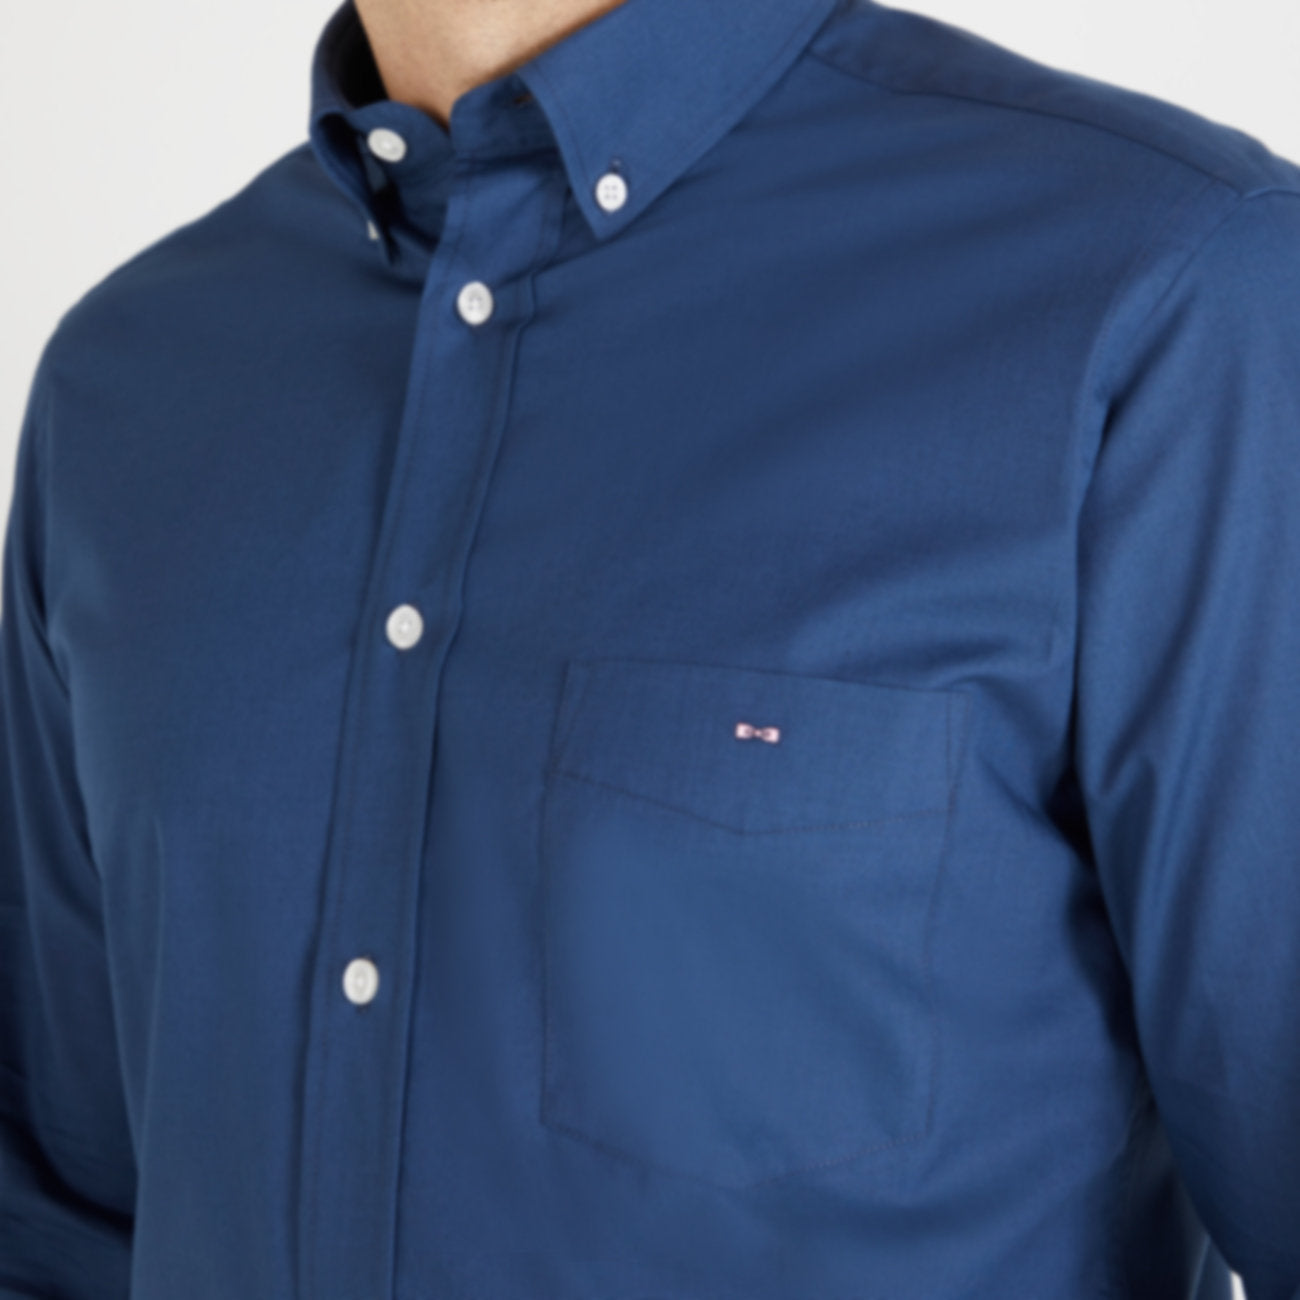 Blue Shirt With Floral Detail_H23CHECL0029_BLF1_03